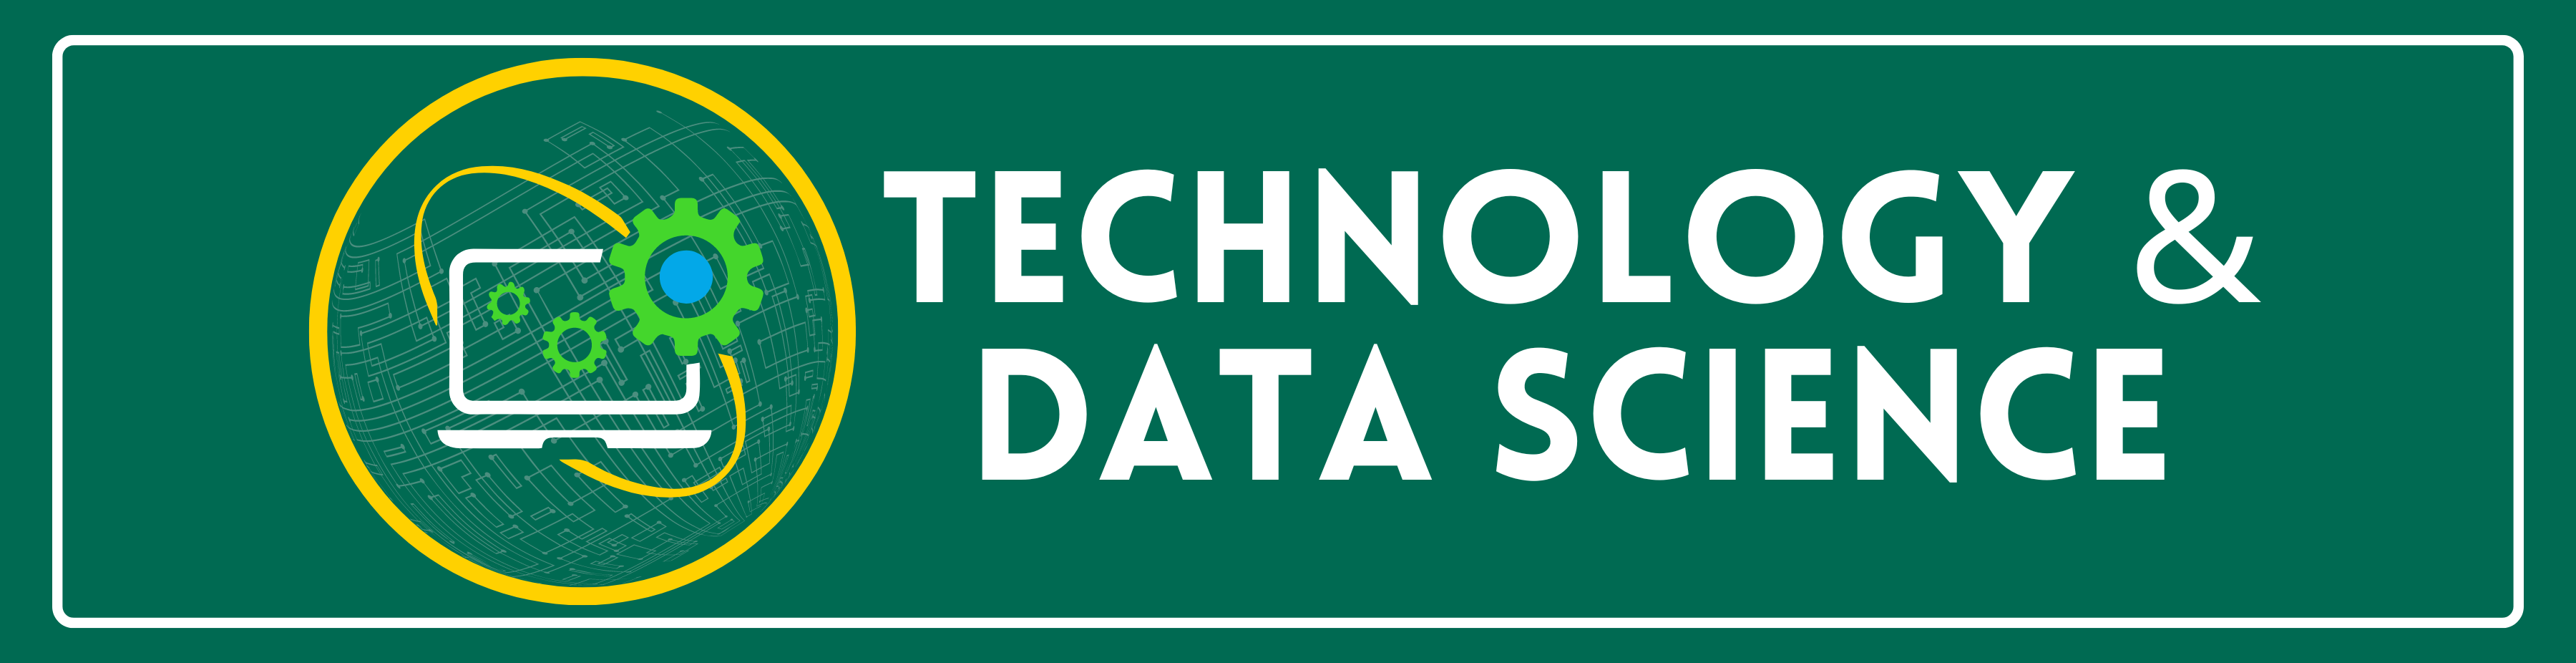 Technology and Data Science Banner